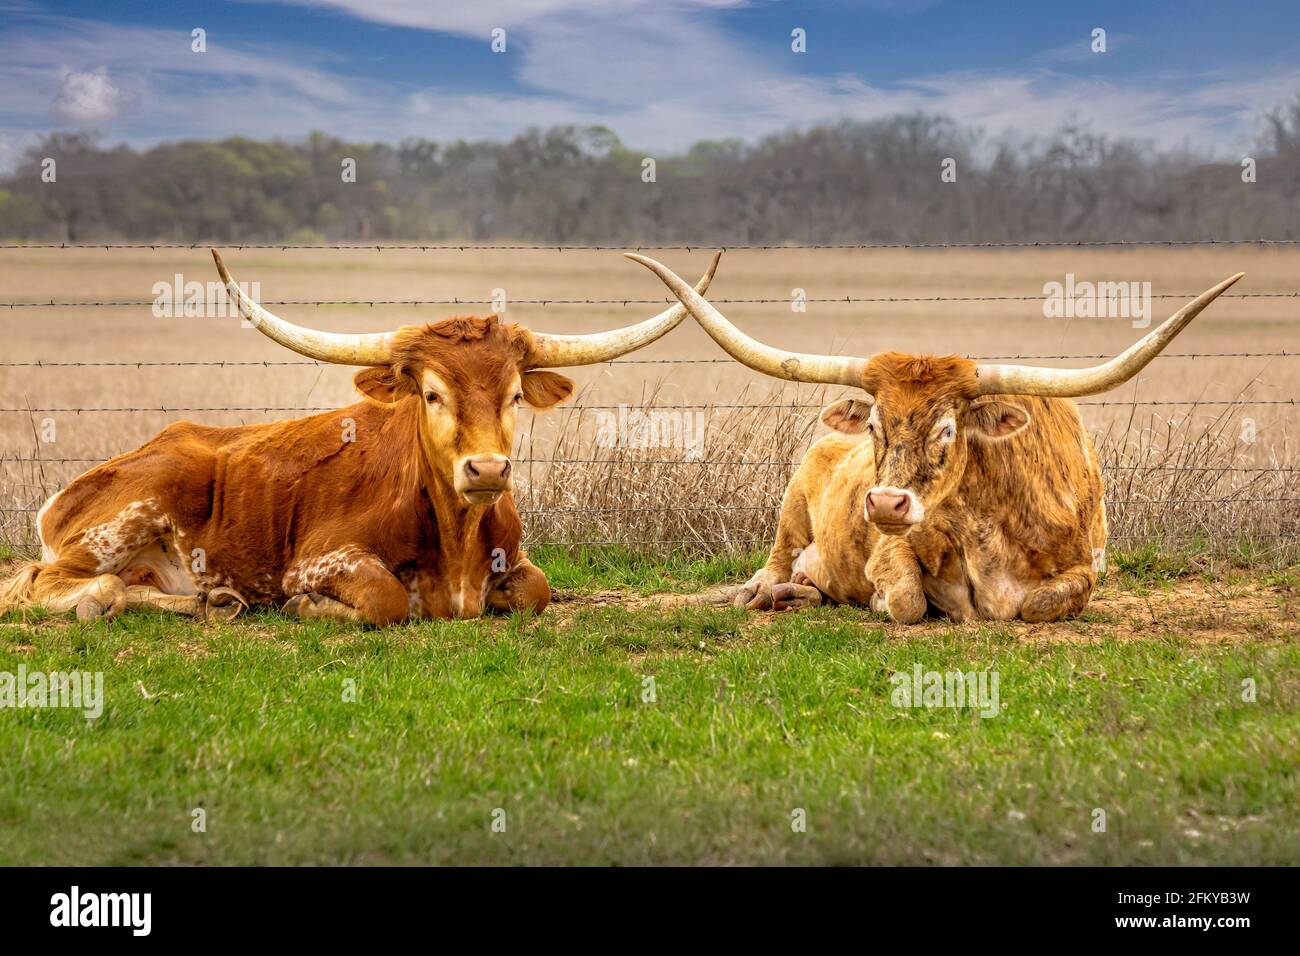 A couple of Texas longhorn cattle relaxing in the grass with crossed horns Stock Photo